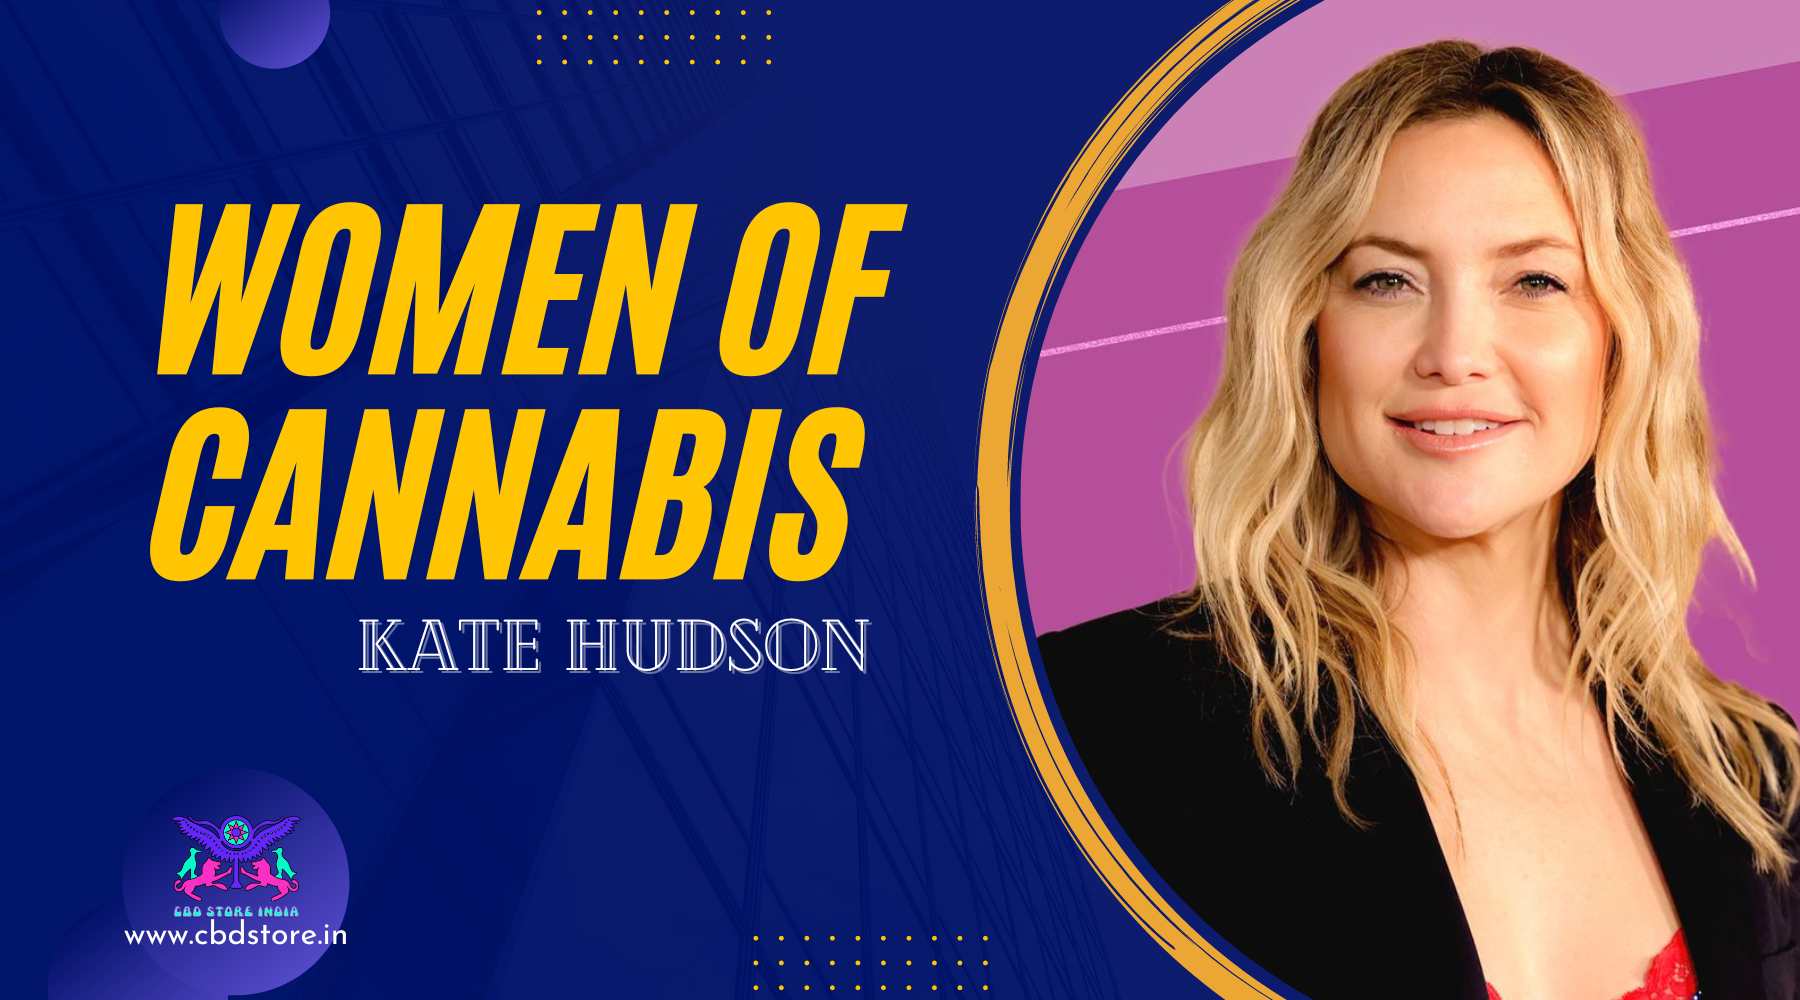 Women of Cannabis: Kate Hudson shares her love for Canna-infused drinks - CBD Store India